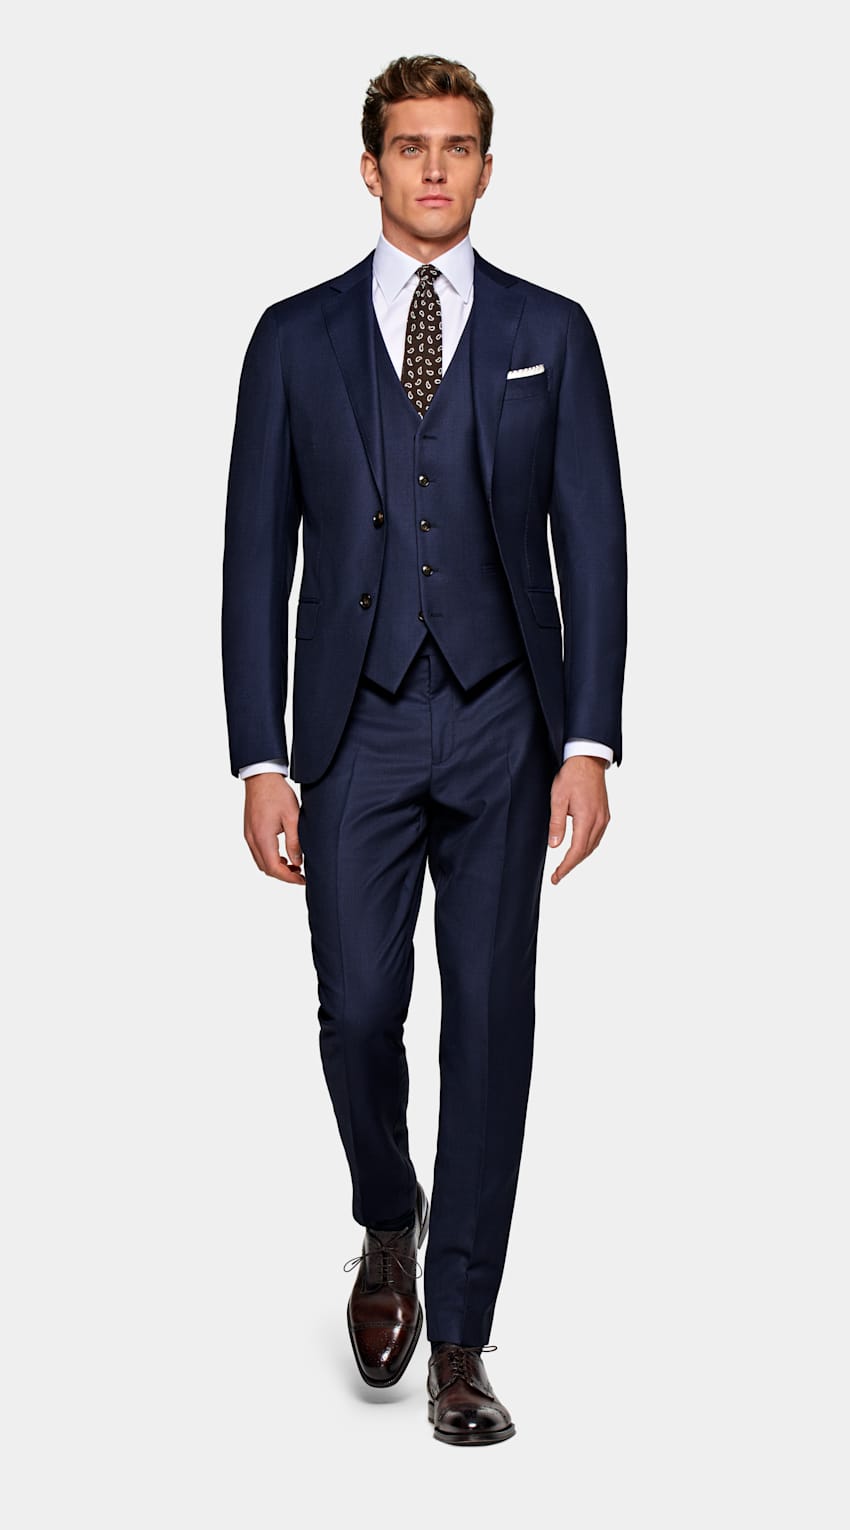 SUITSUPPLY Pure Wool S130's by Vitale Barberis Canonico, Italy Blue Bird's Eye Sienna Suit